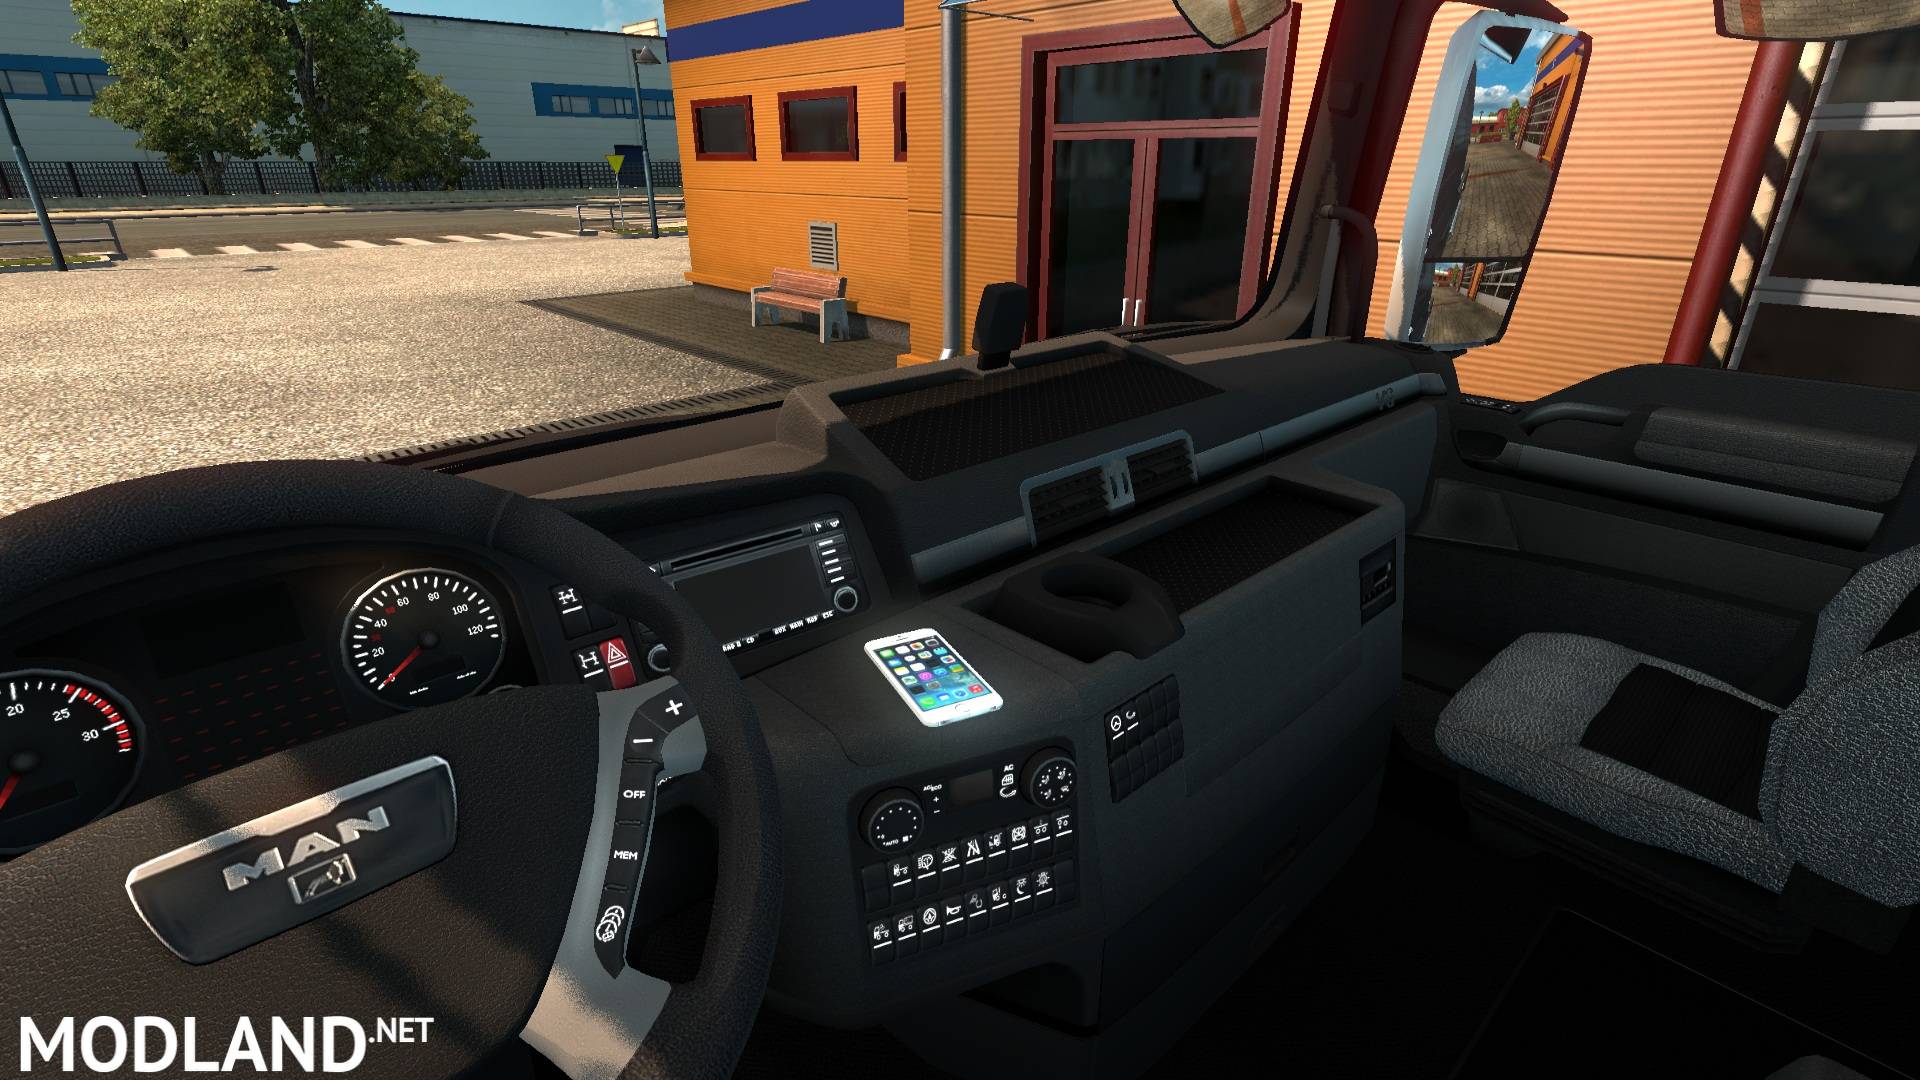 Iphone 5 addon by Danno mod for ETS 2